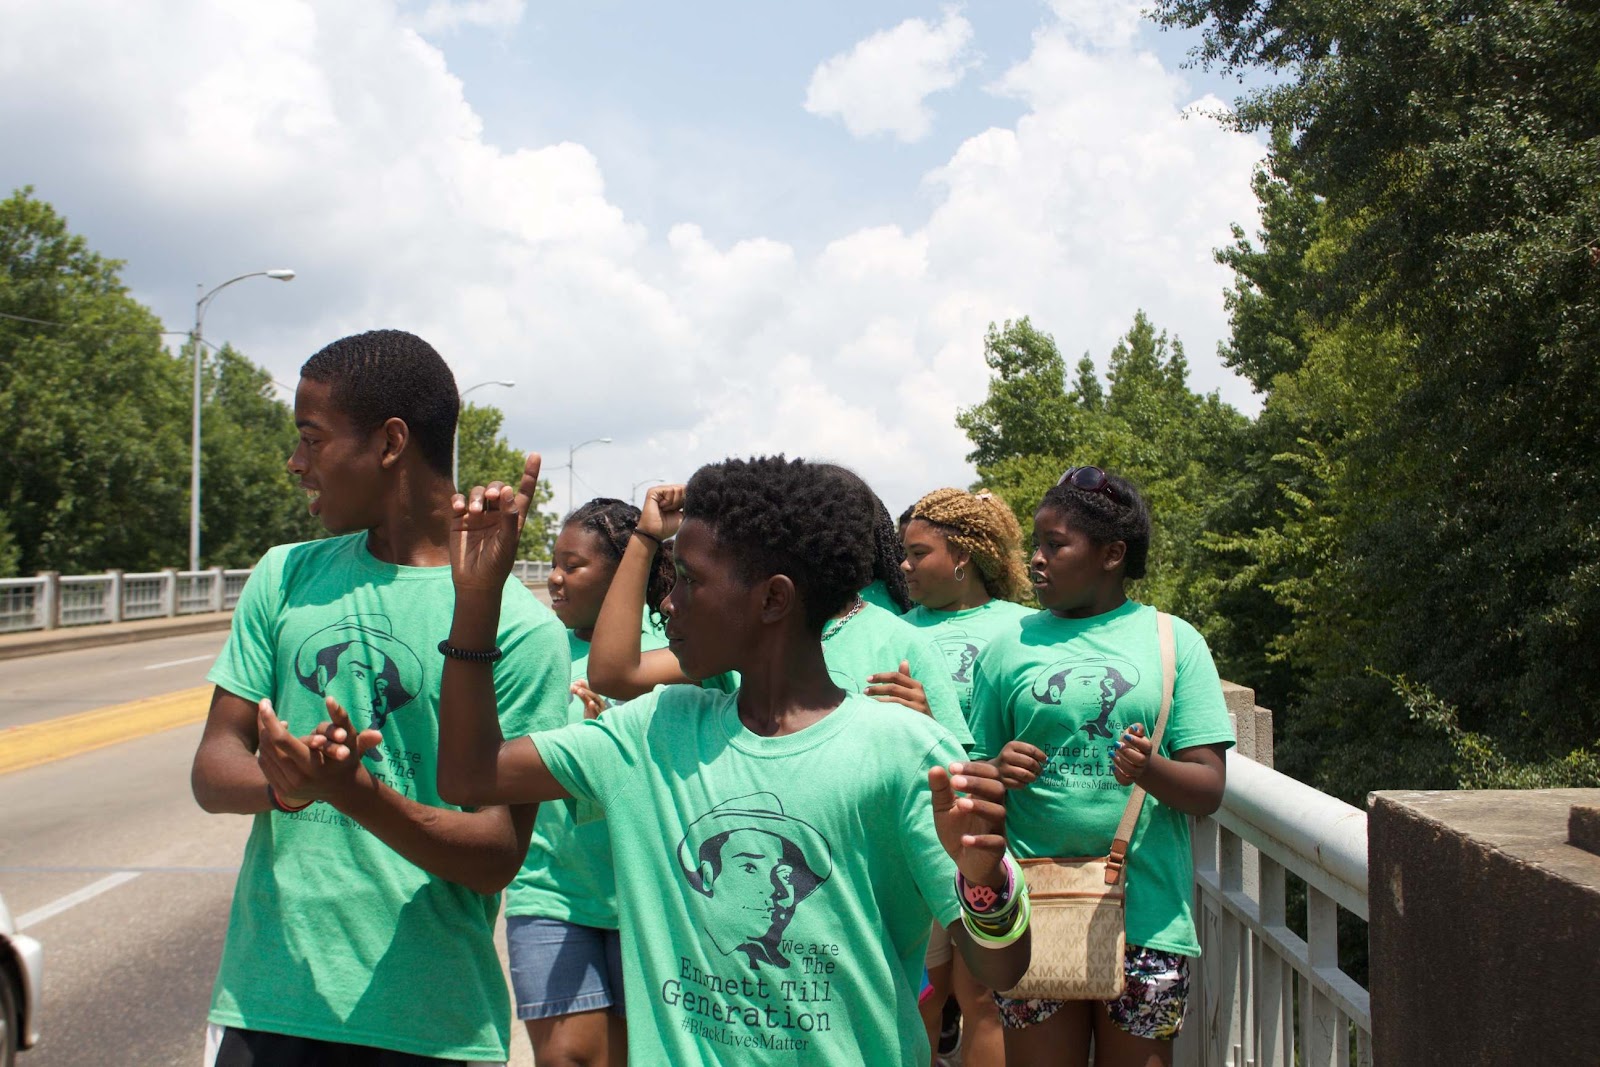 SCFP students, interns and staff spend the last three weeks of the summer on life-changing trips, here are students crossing the Edmund Pettus Bridge in Selma, Alabama